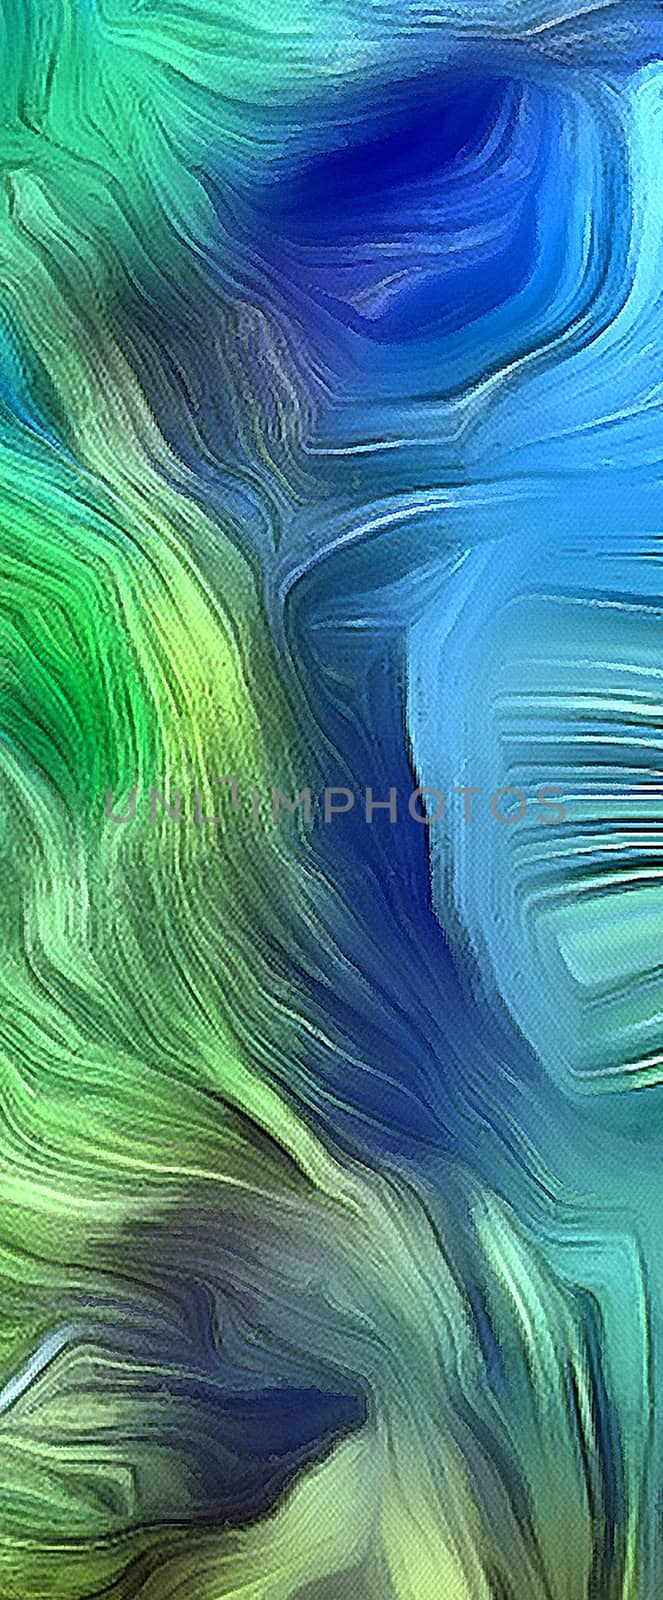 Fluid lines of color movement. Green is a main color. 3D rendering.